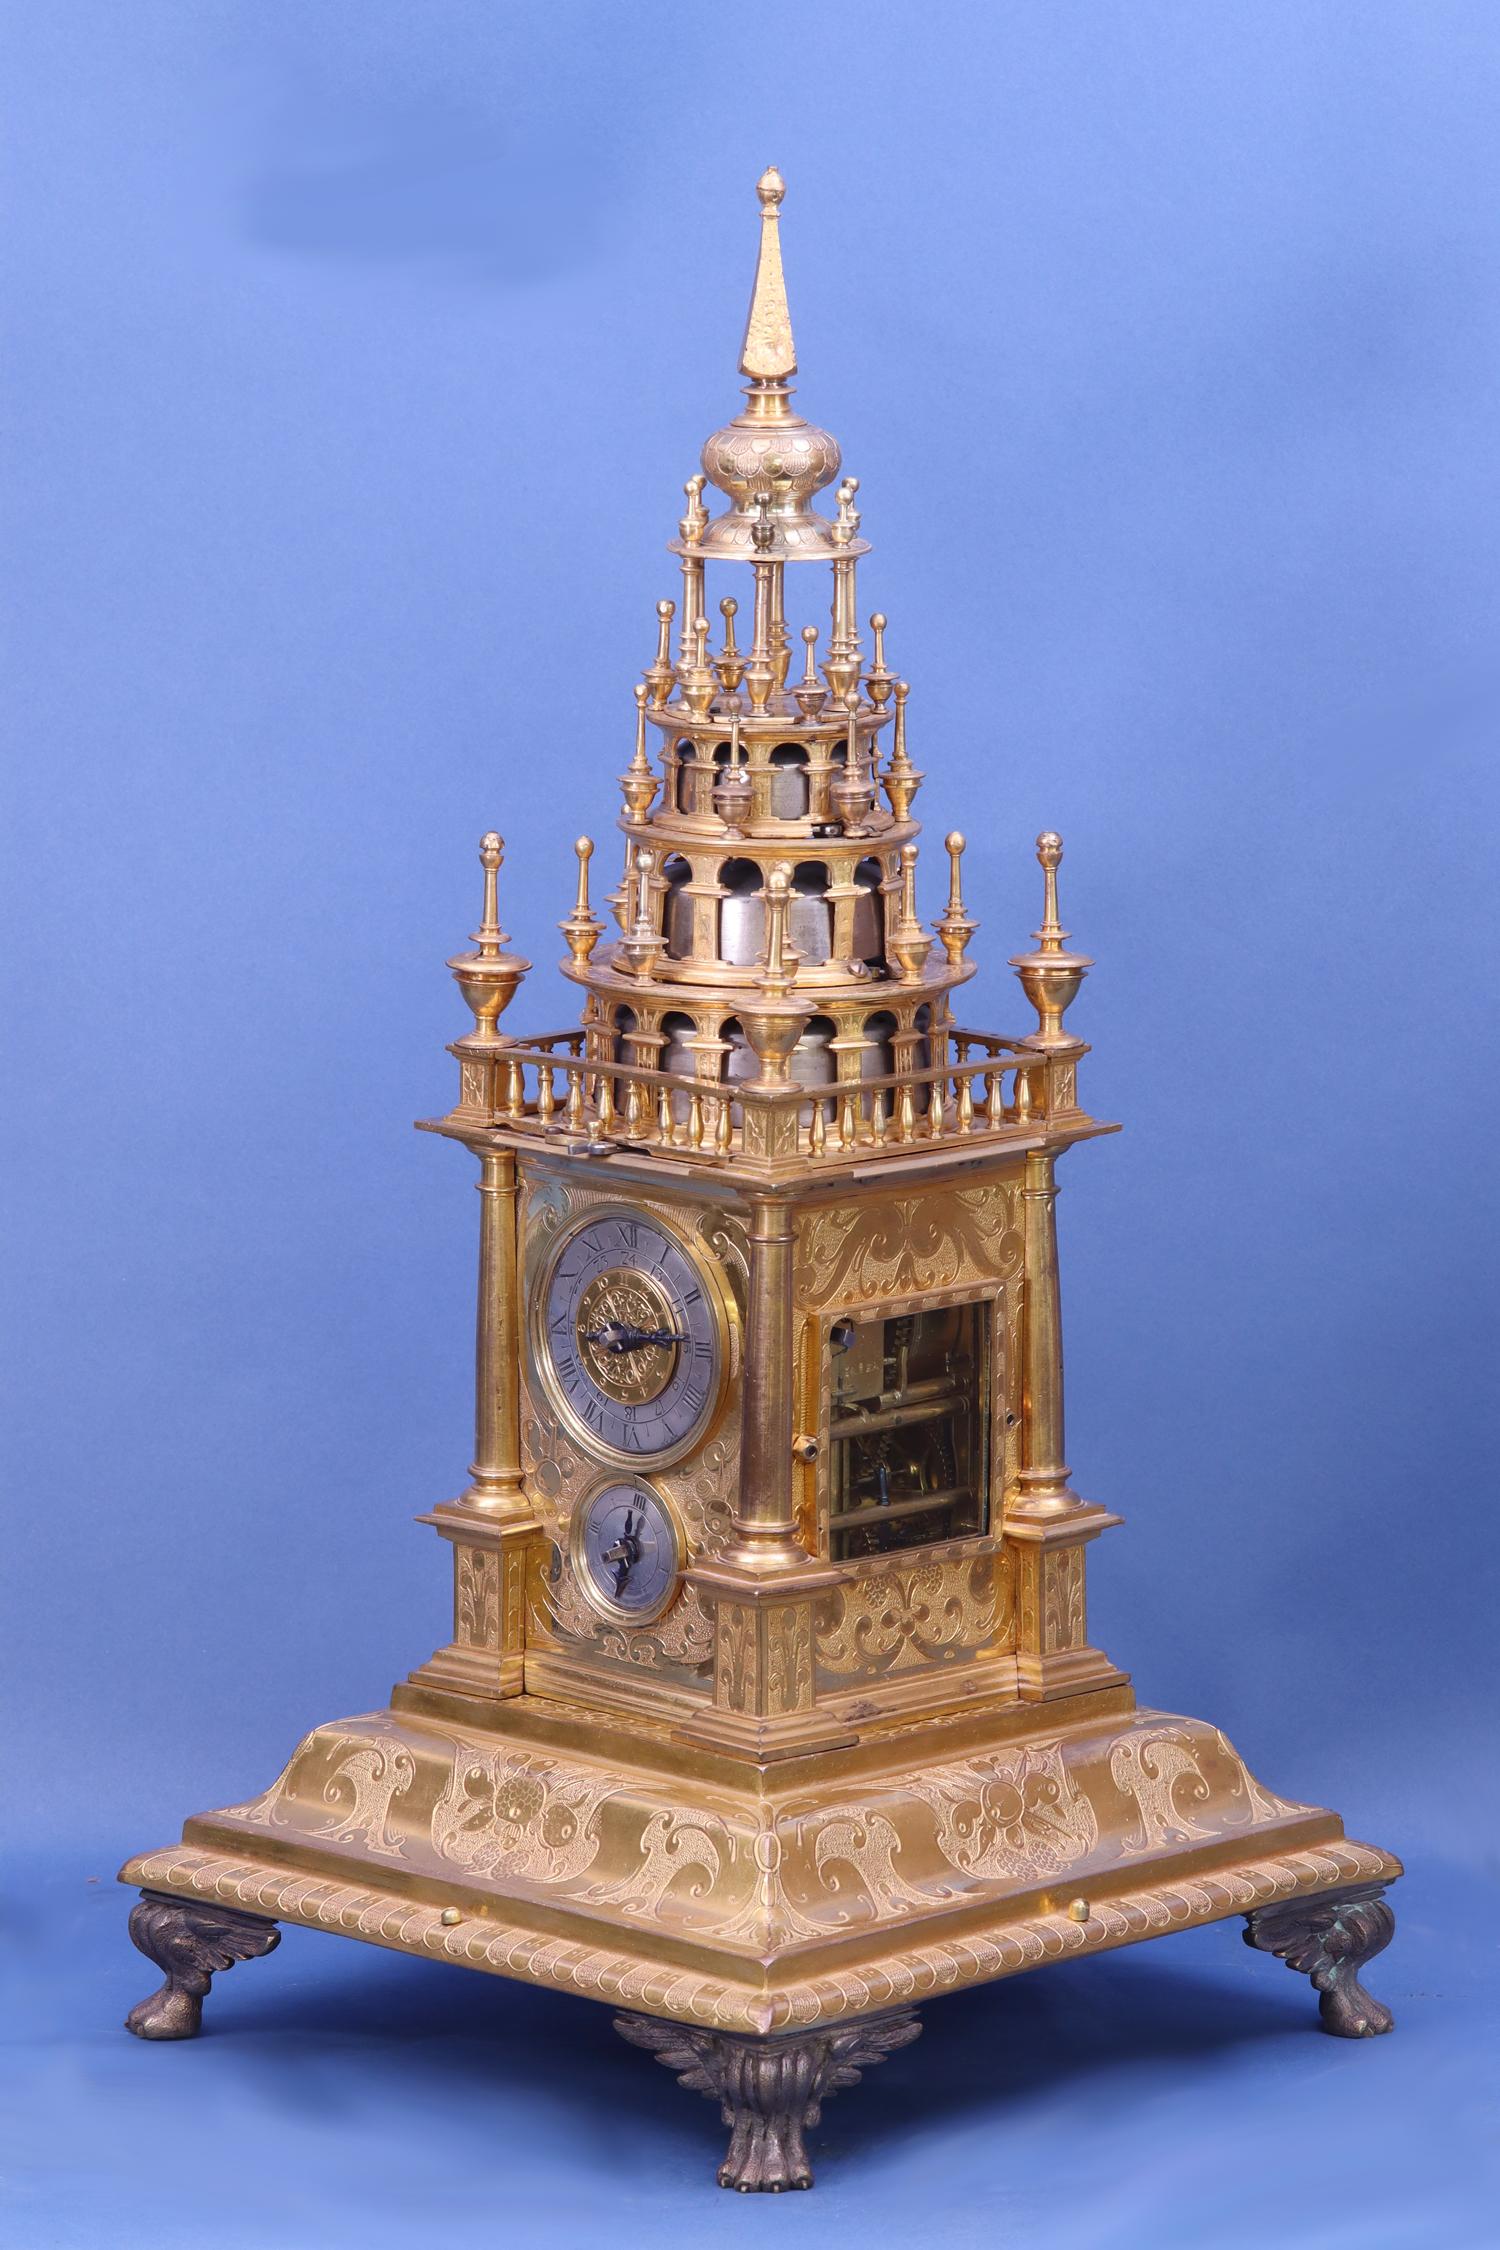 Maker:	
Samuel Haug, Augsburg. Germany.

Description:	
An early 17th century gilt-copper quarter-striking table clock with alarm and adjustable striking by Samuel Haug of Augsburg.

Case:	
The elaborately engraved Augsburg style case has an ogee